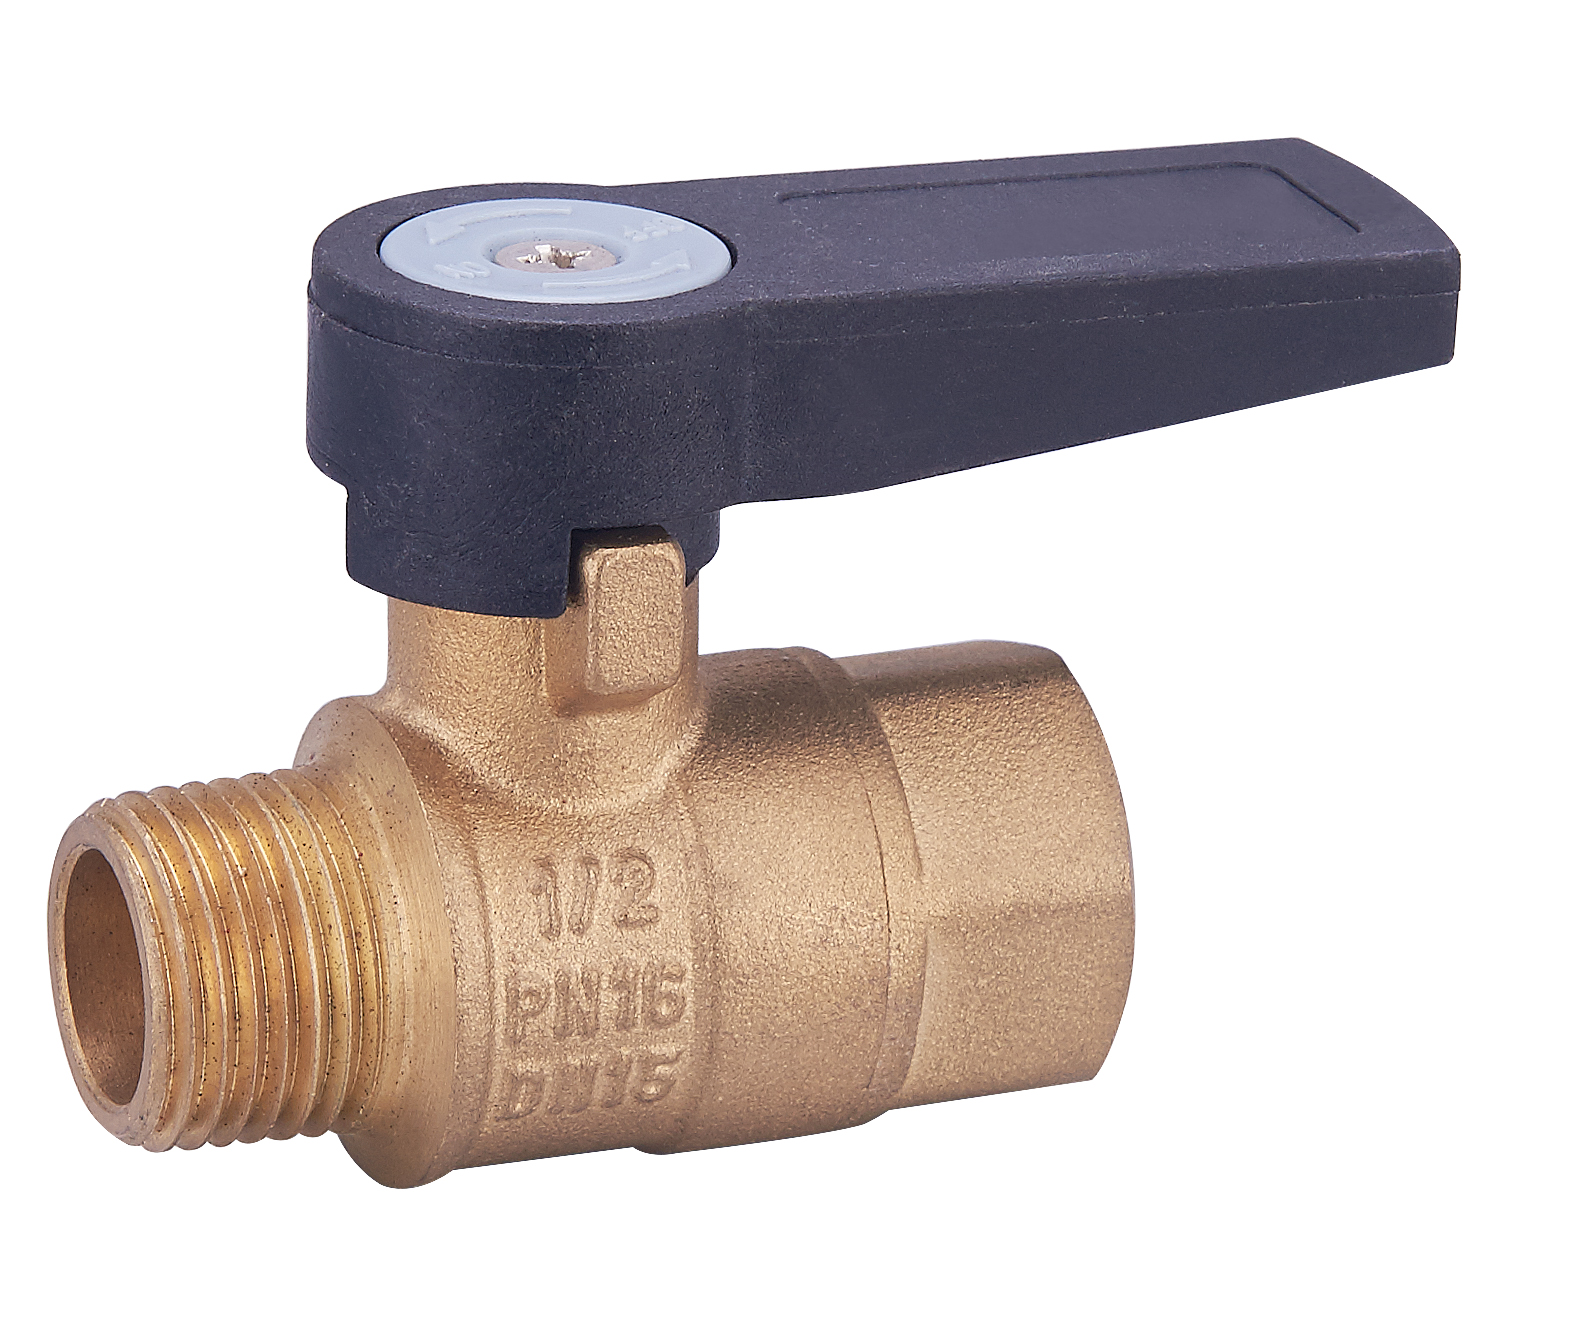 ZS200-1024: Full Ball Valve With ABS Handle 